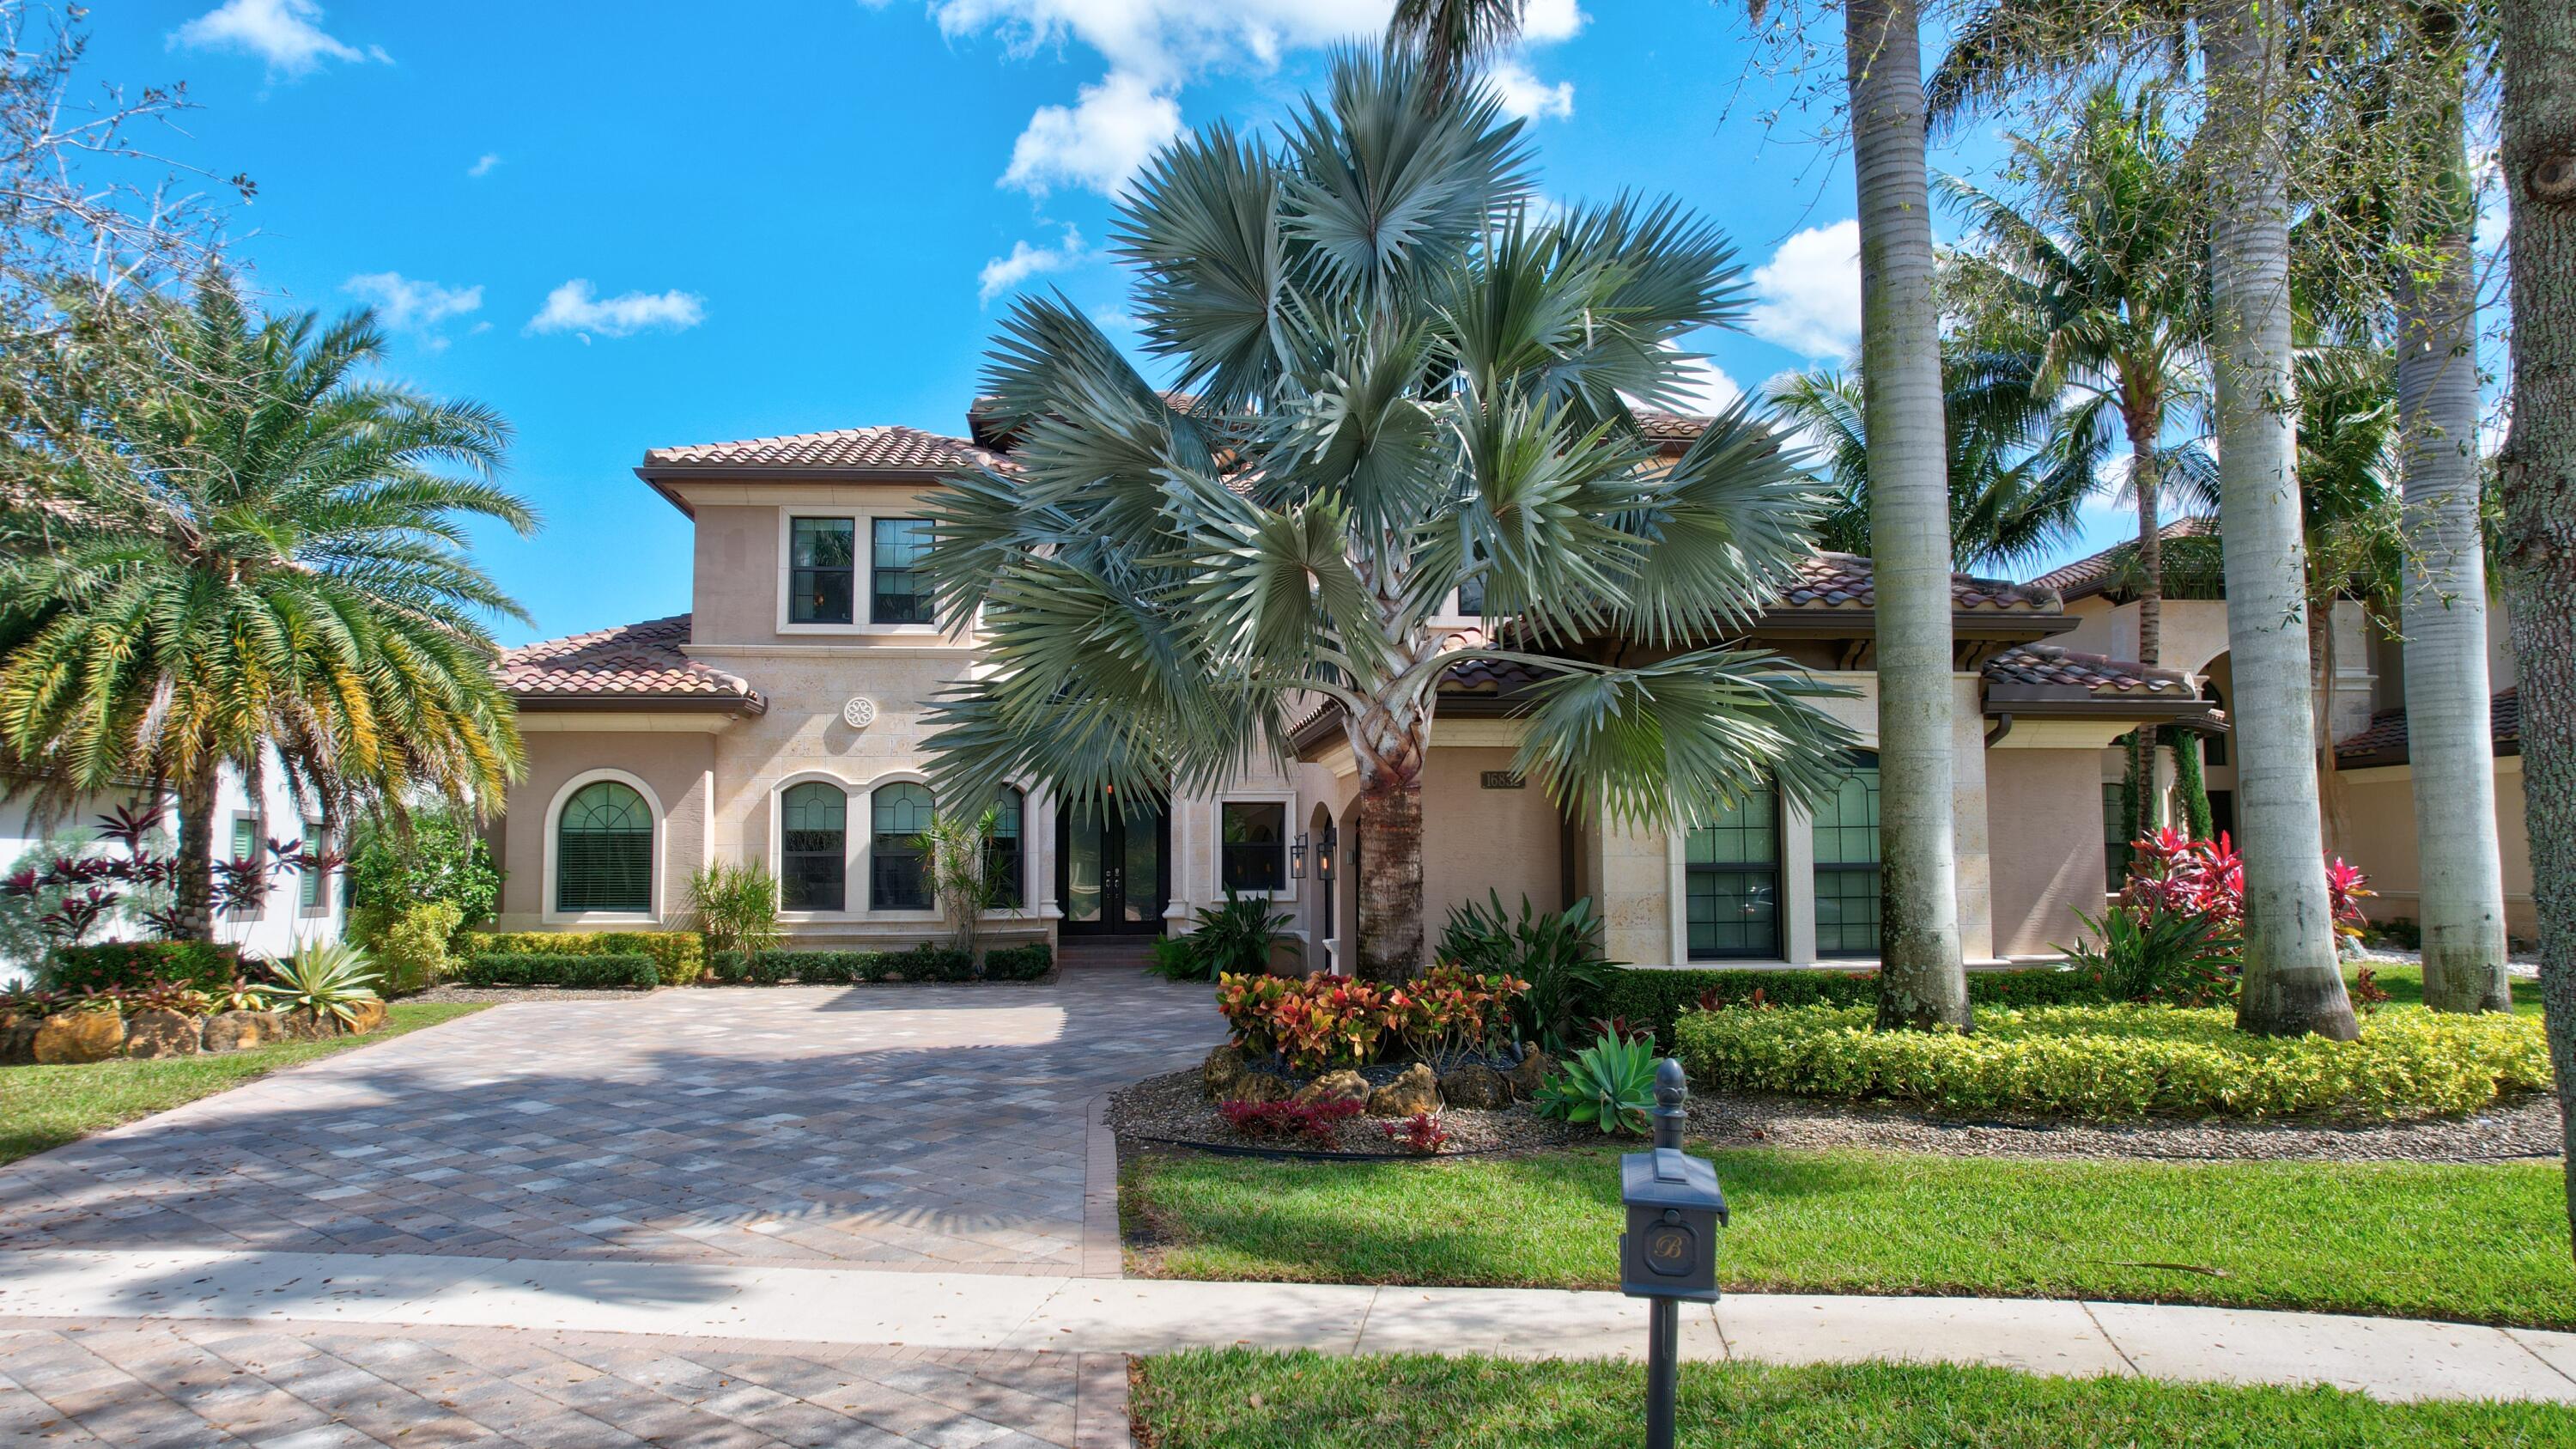 16832 Charles River Drive, Delray Beach, Palm Beach County, Florida - 6 Bedrooms  
6.5 Bathrooms - 